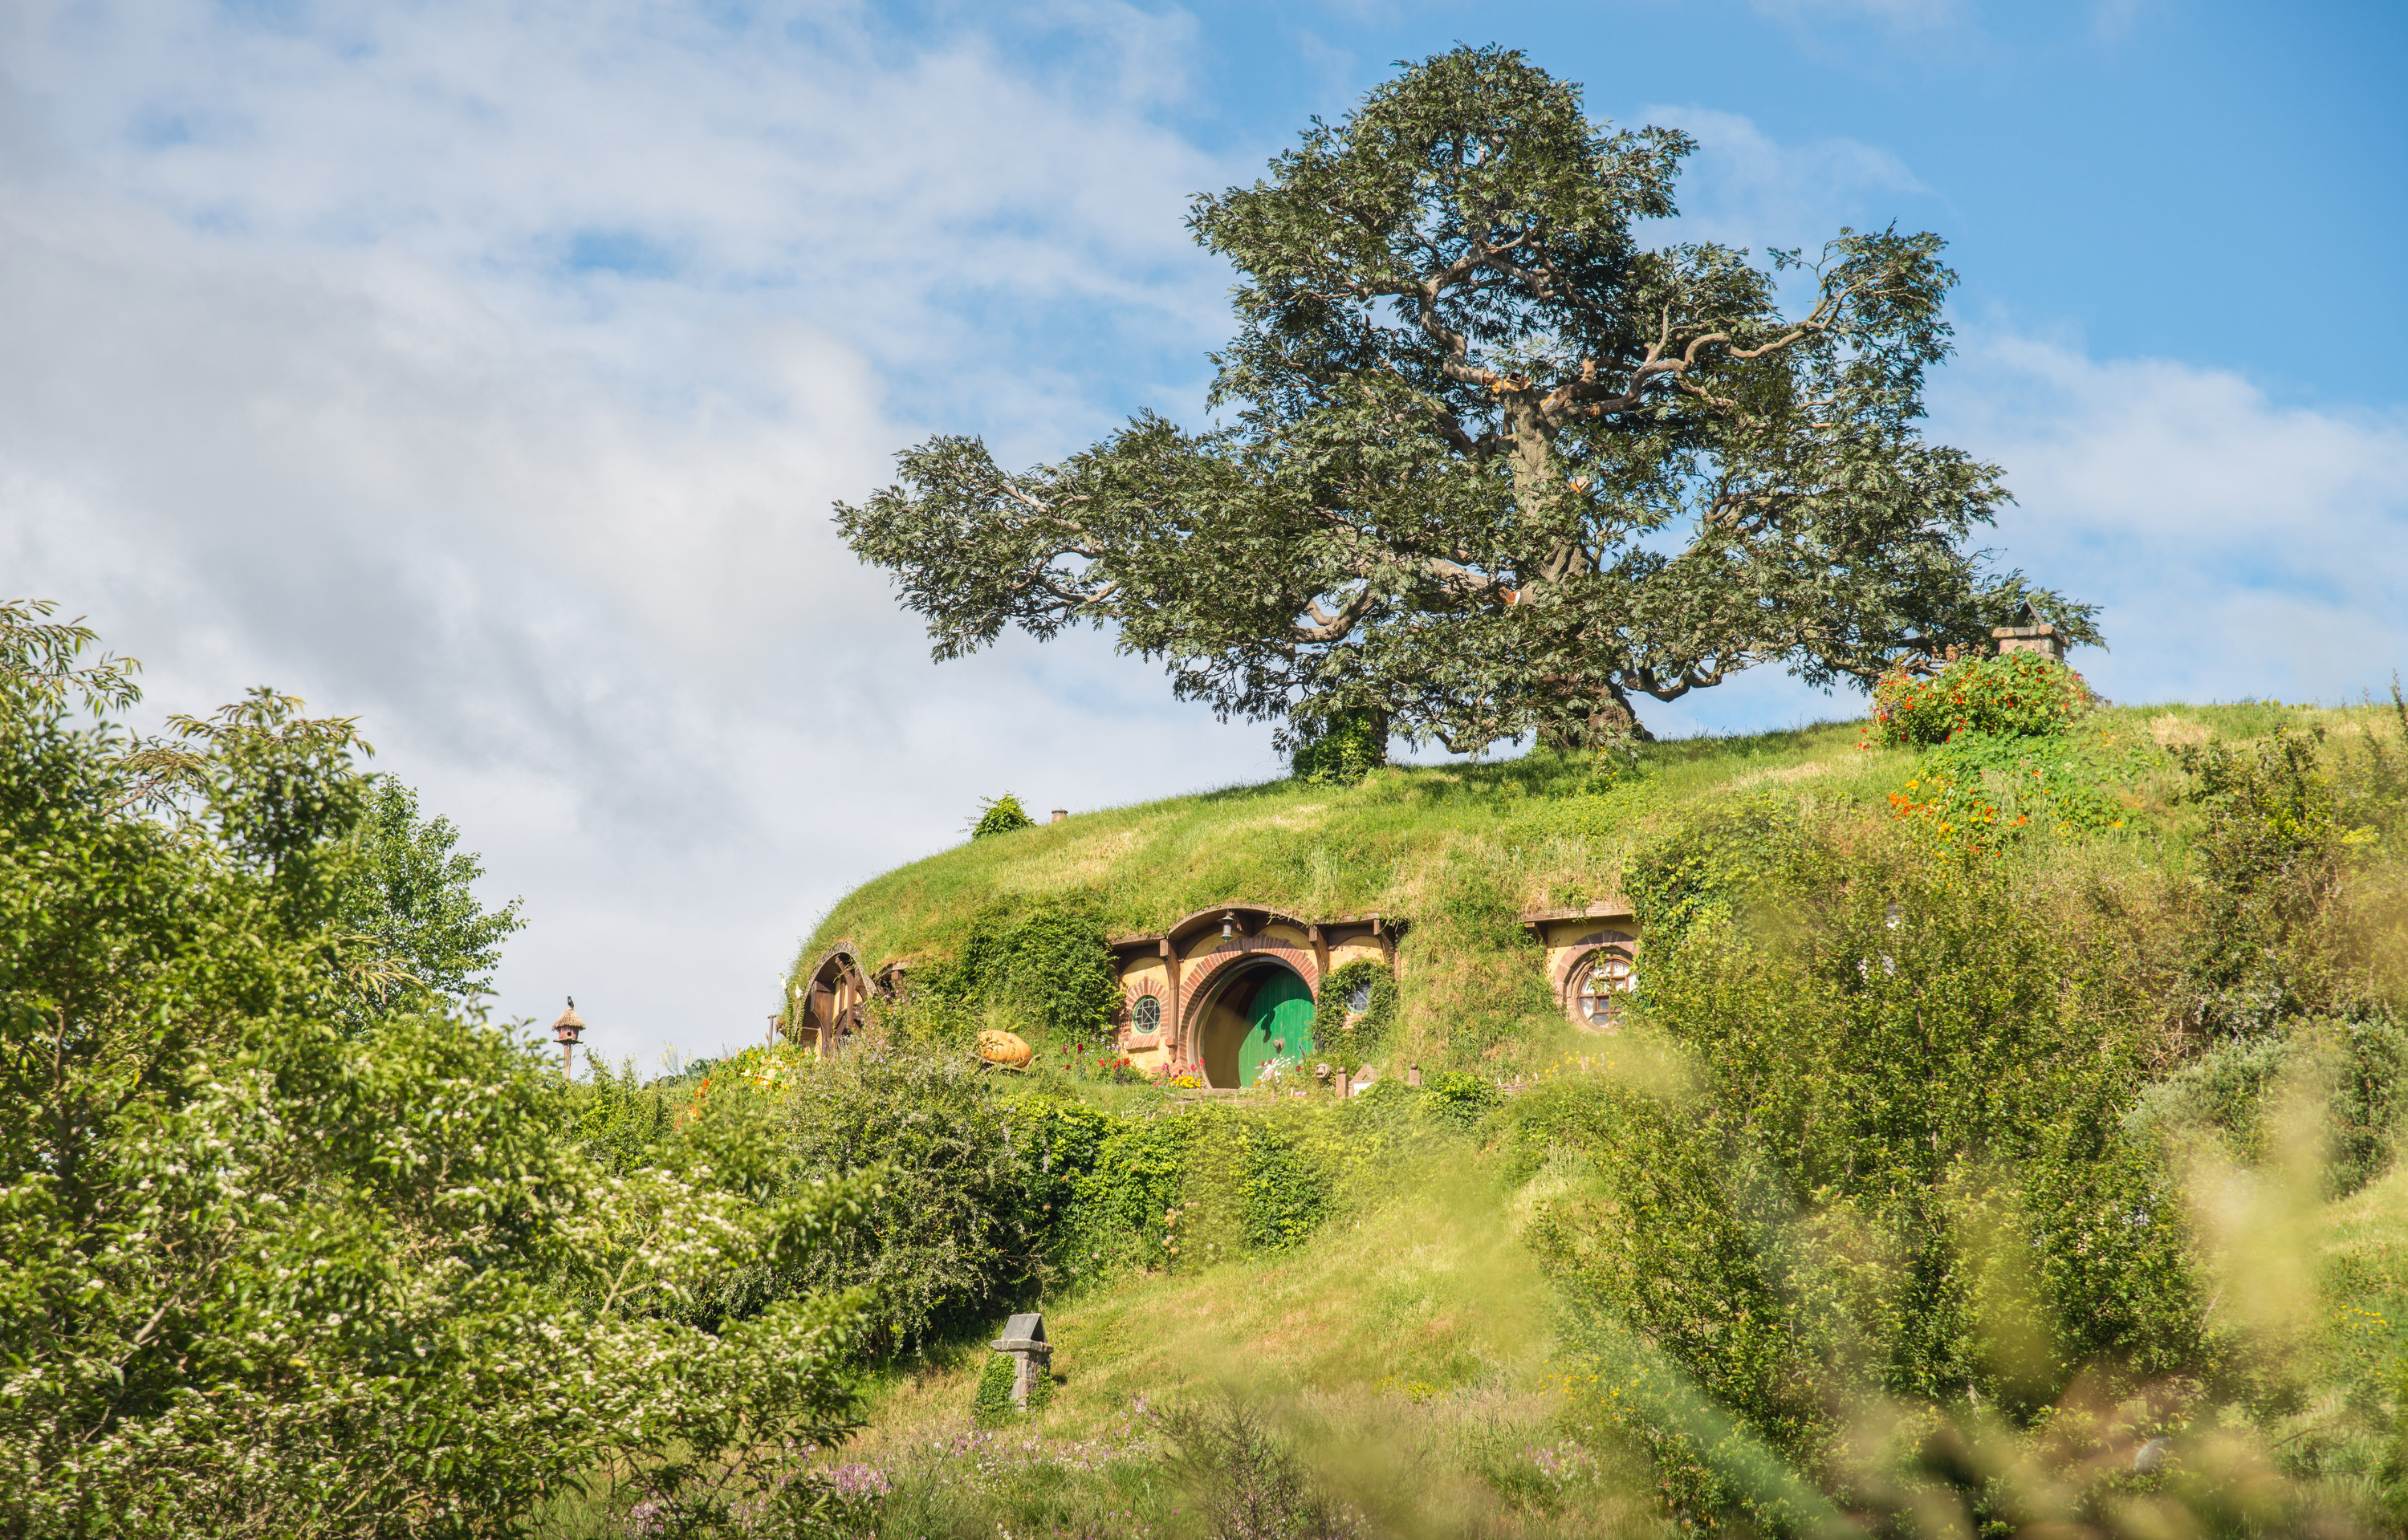 The Bag End, an iconic famous Hobbiton holes in the Hobbiton Movie Set Tour, in Matamata, New Zealand.